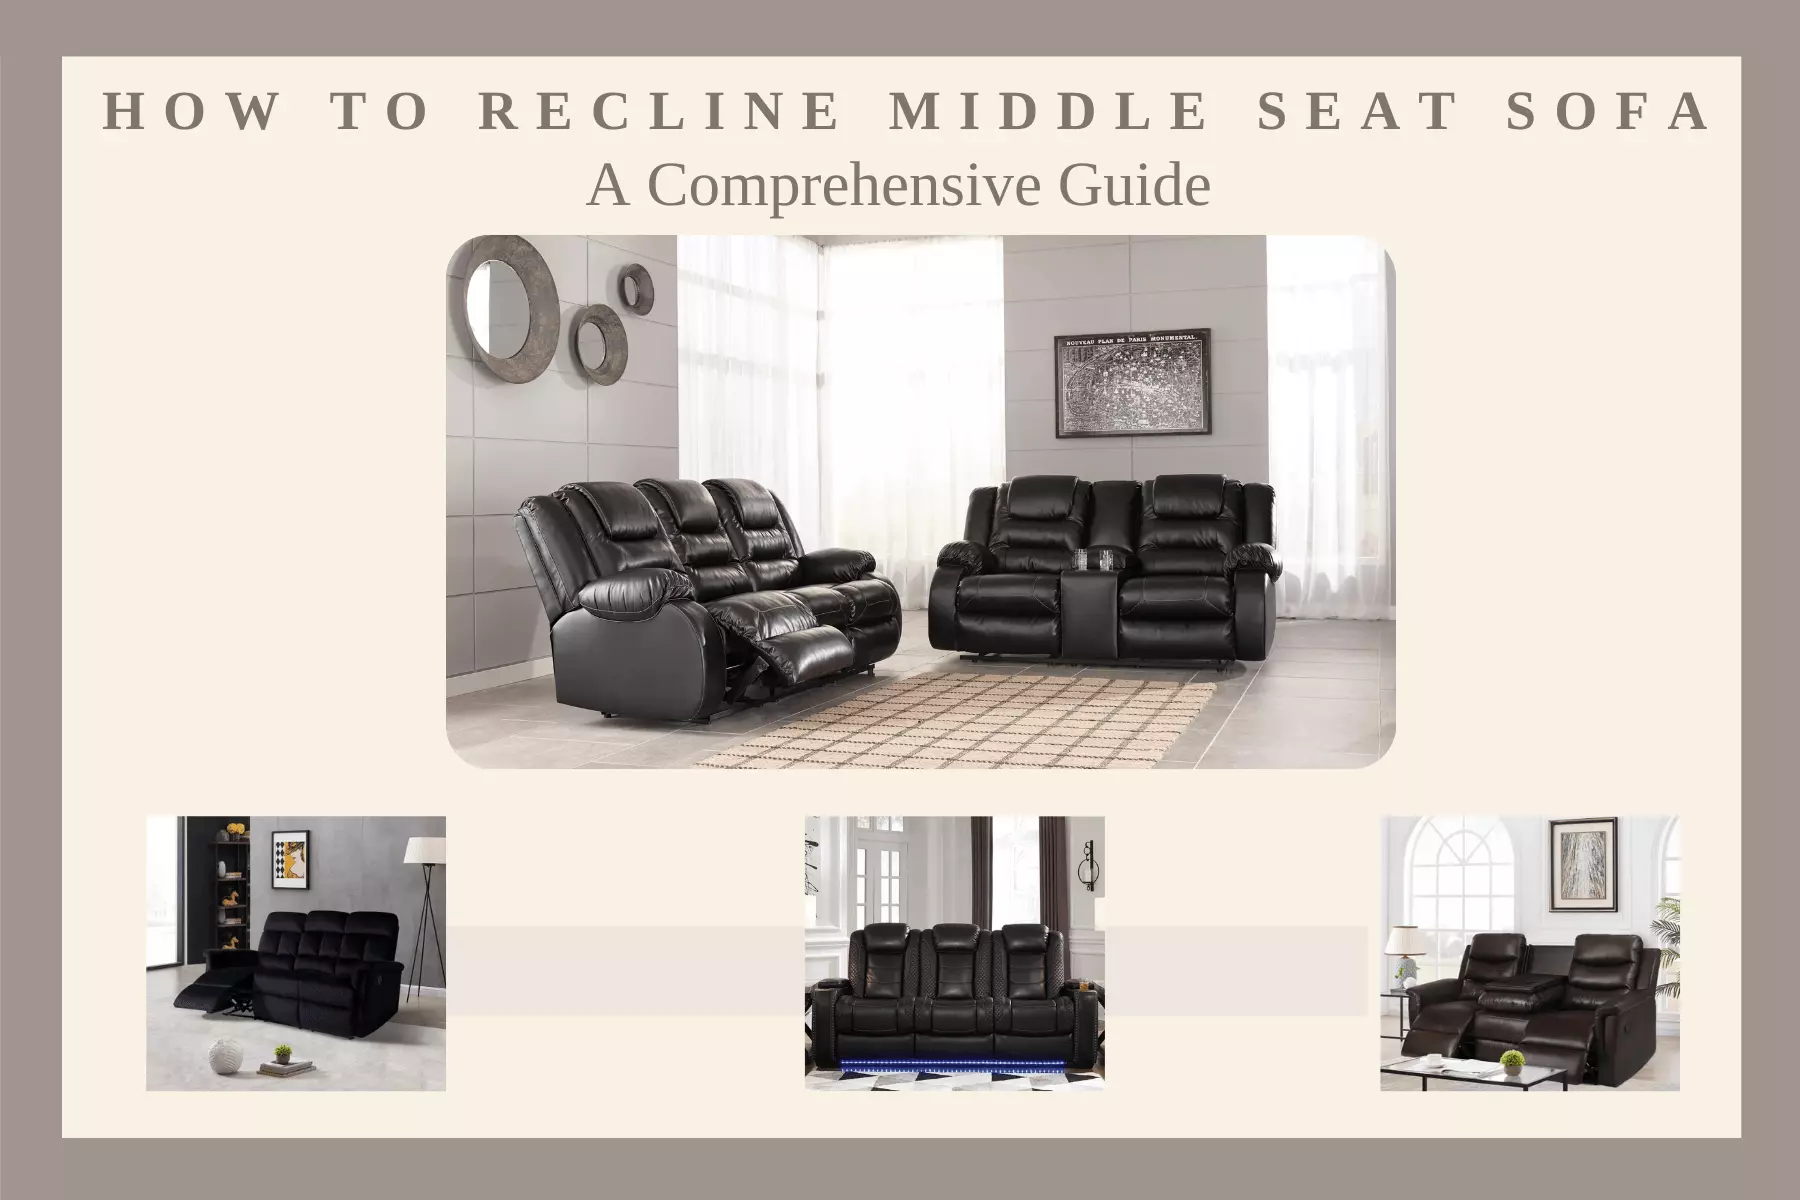 How to Recline Middle Seat Sofa